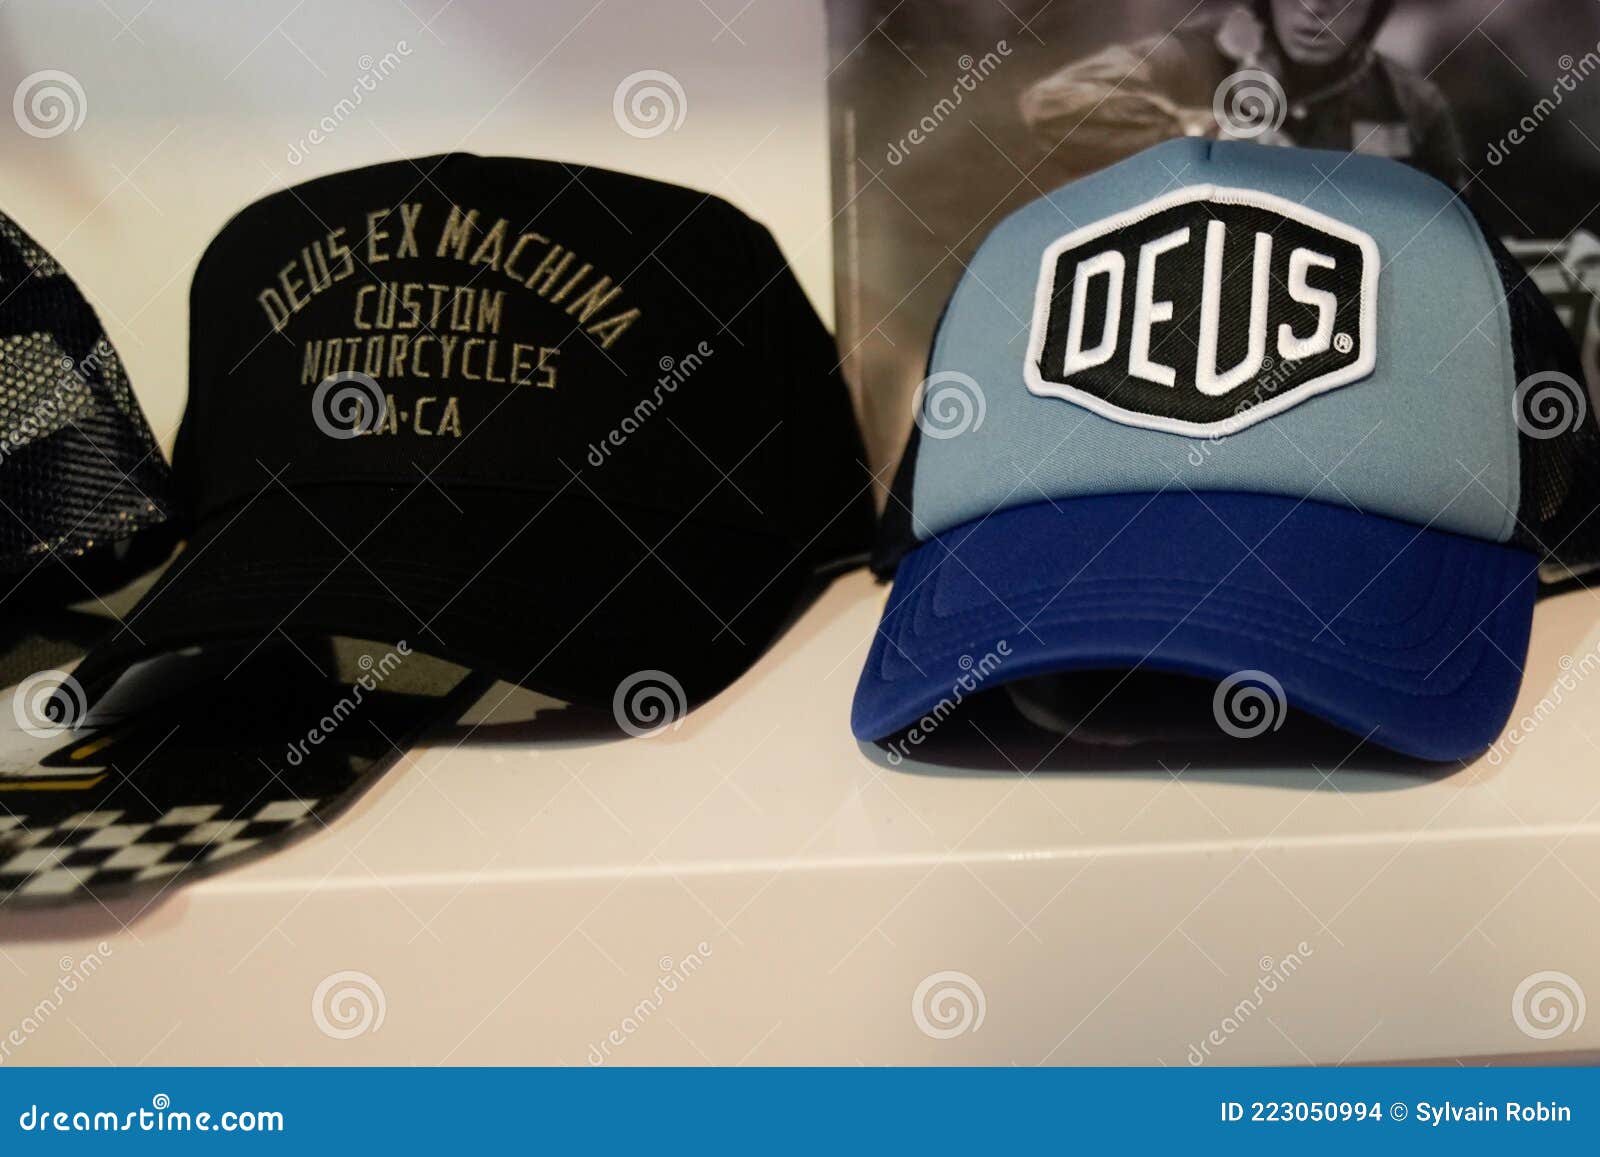 Deus Custom Motorcycles Cap in the Store with Text Logo and Brand Sign Editorial Stock Image - Image of culture, 223050994